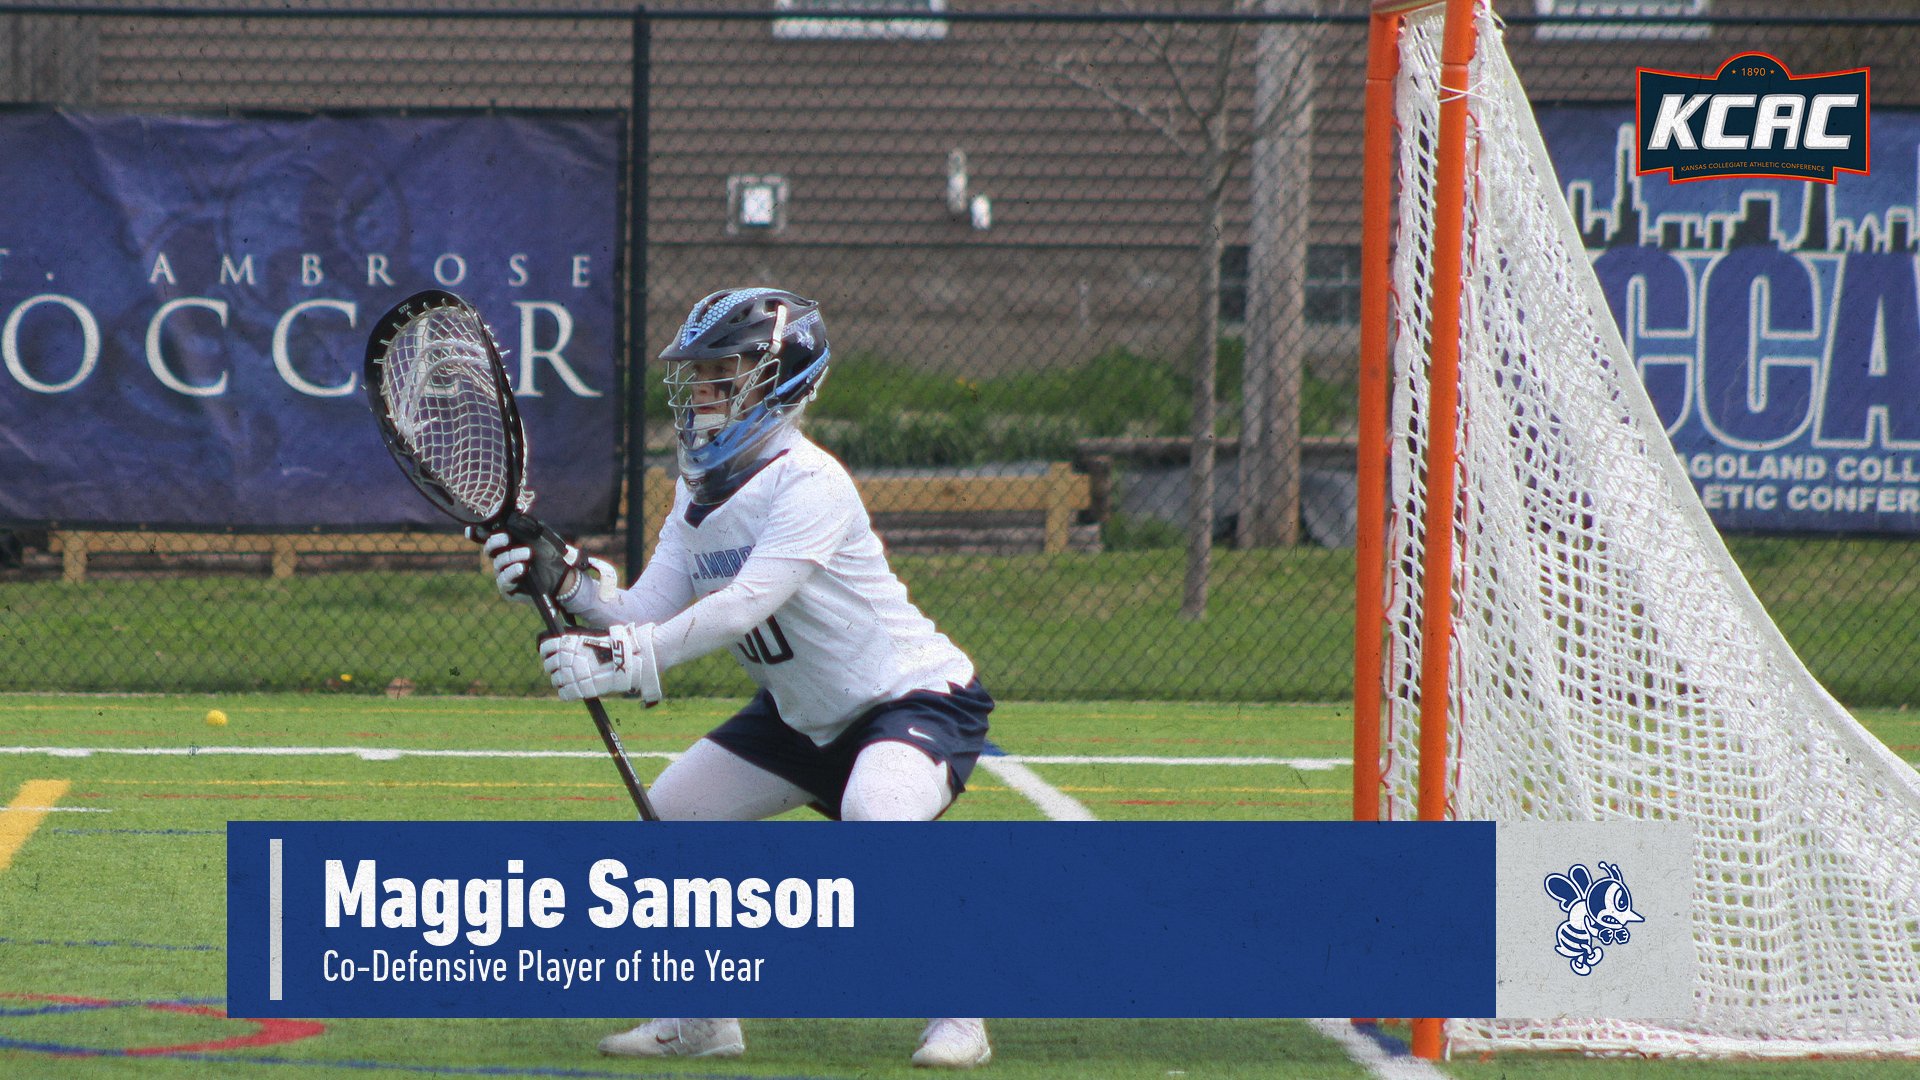 Samson named Co-Defensive Player of the Year; three Bees named second team all-KCAC